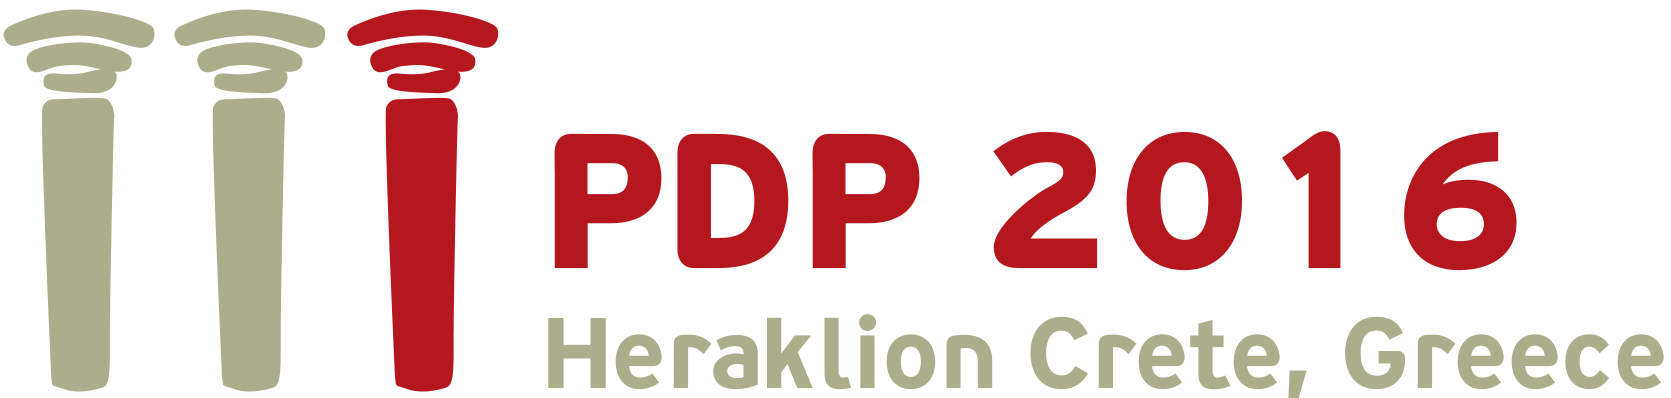 PDP2016 24th International Conference on Parallel, Distributed and Network-Based Processing